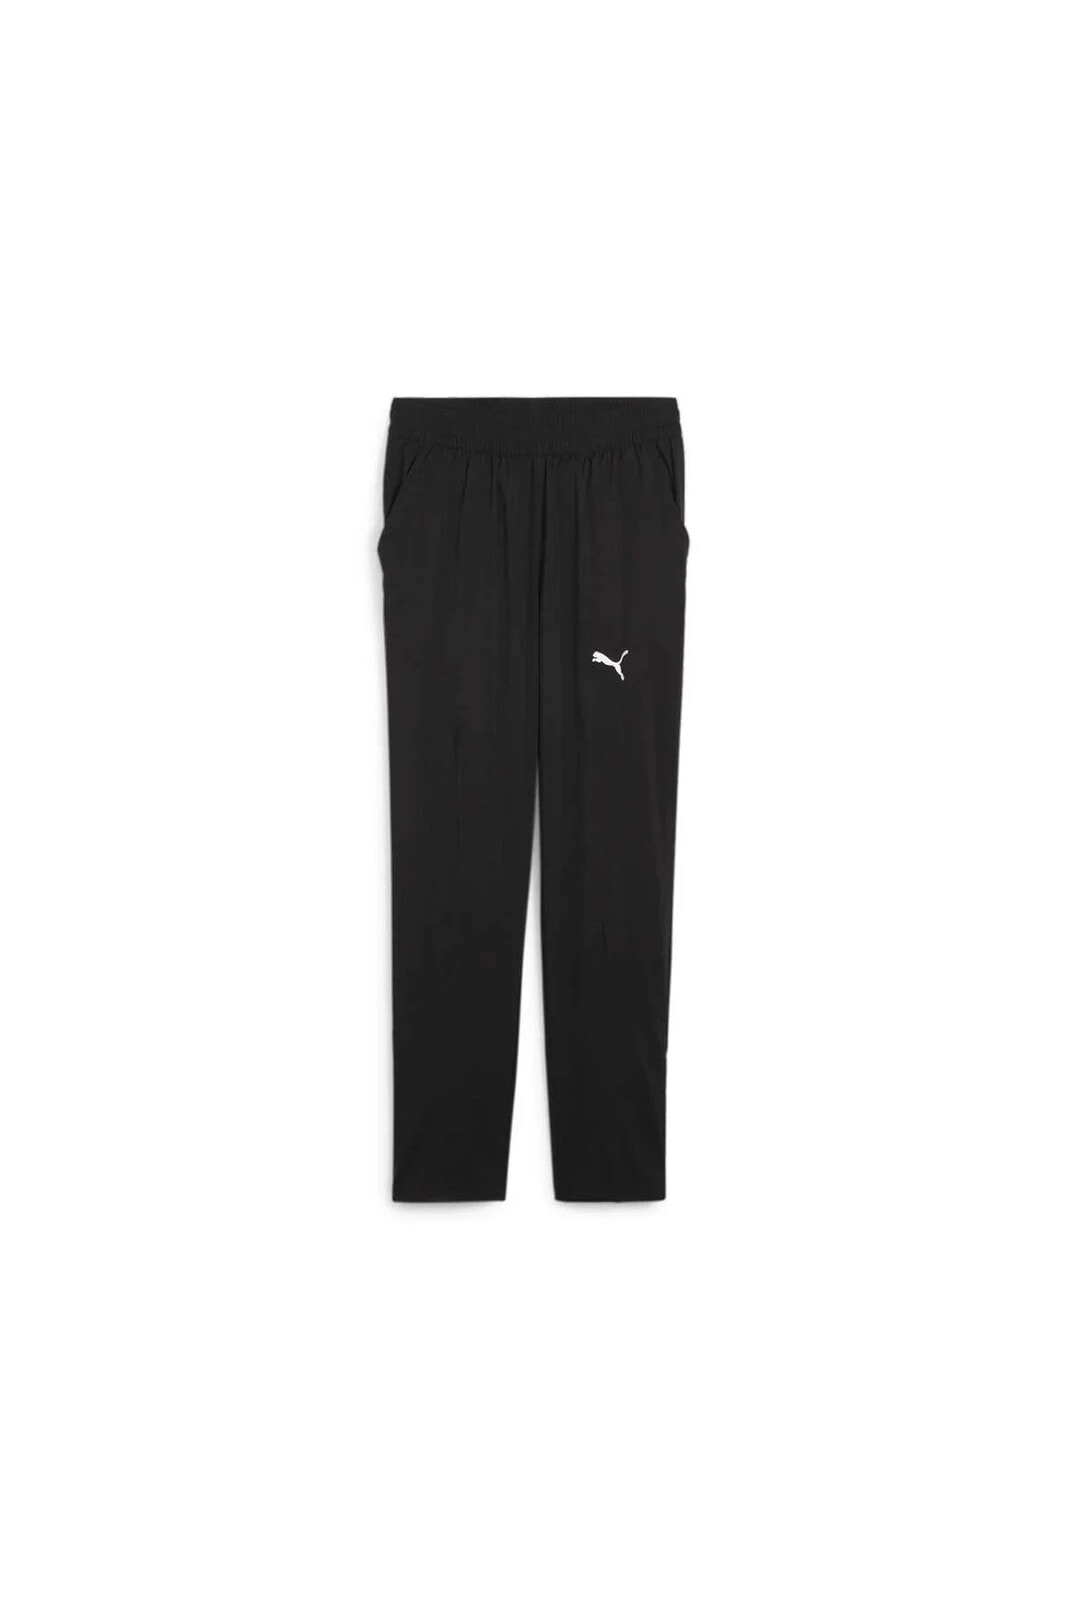 FIT Woven Tapered Pant